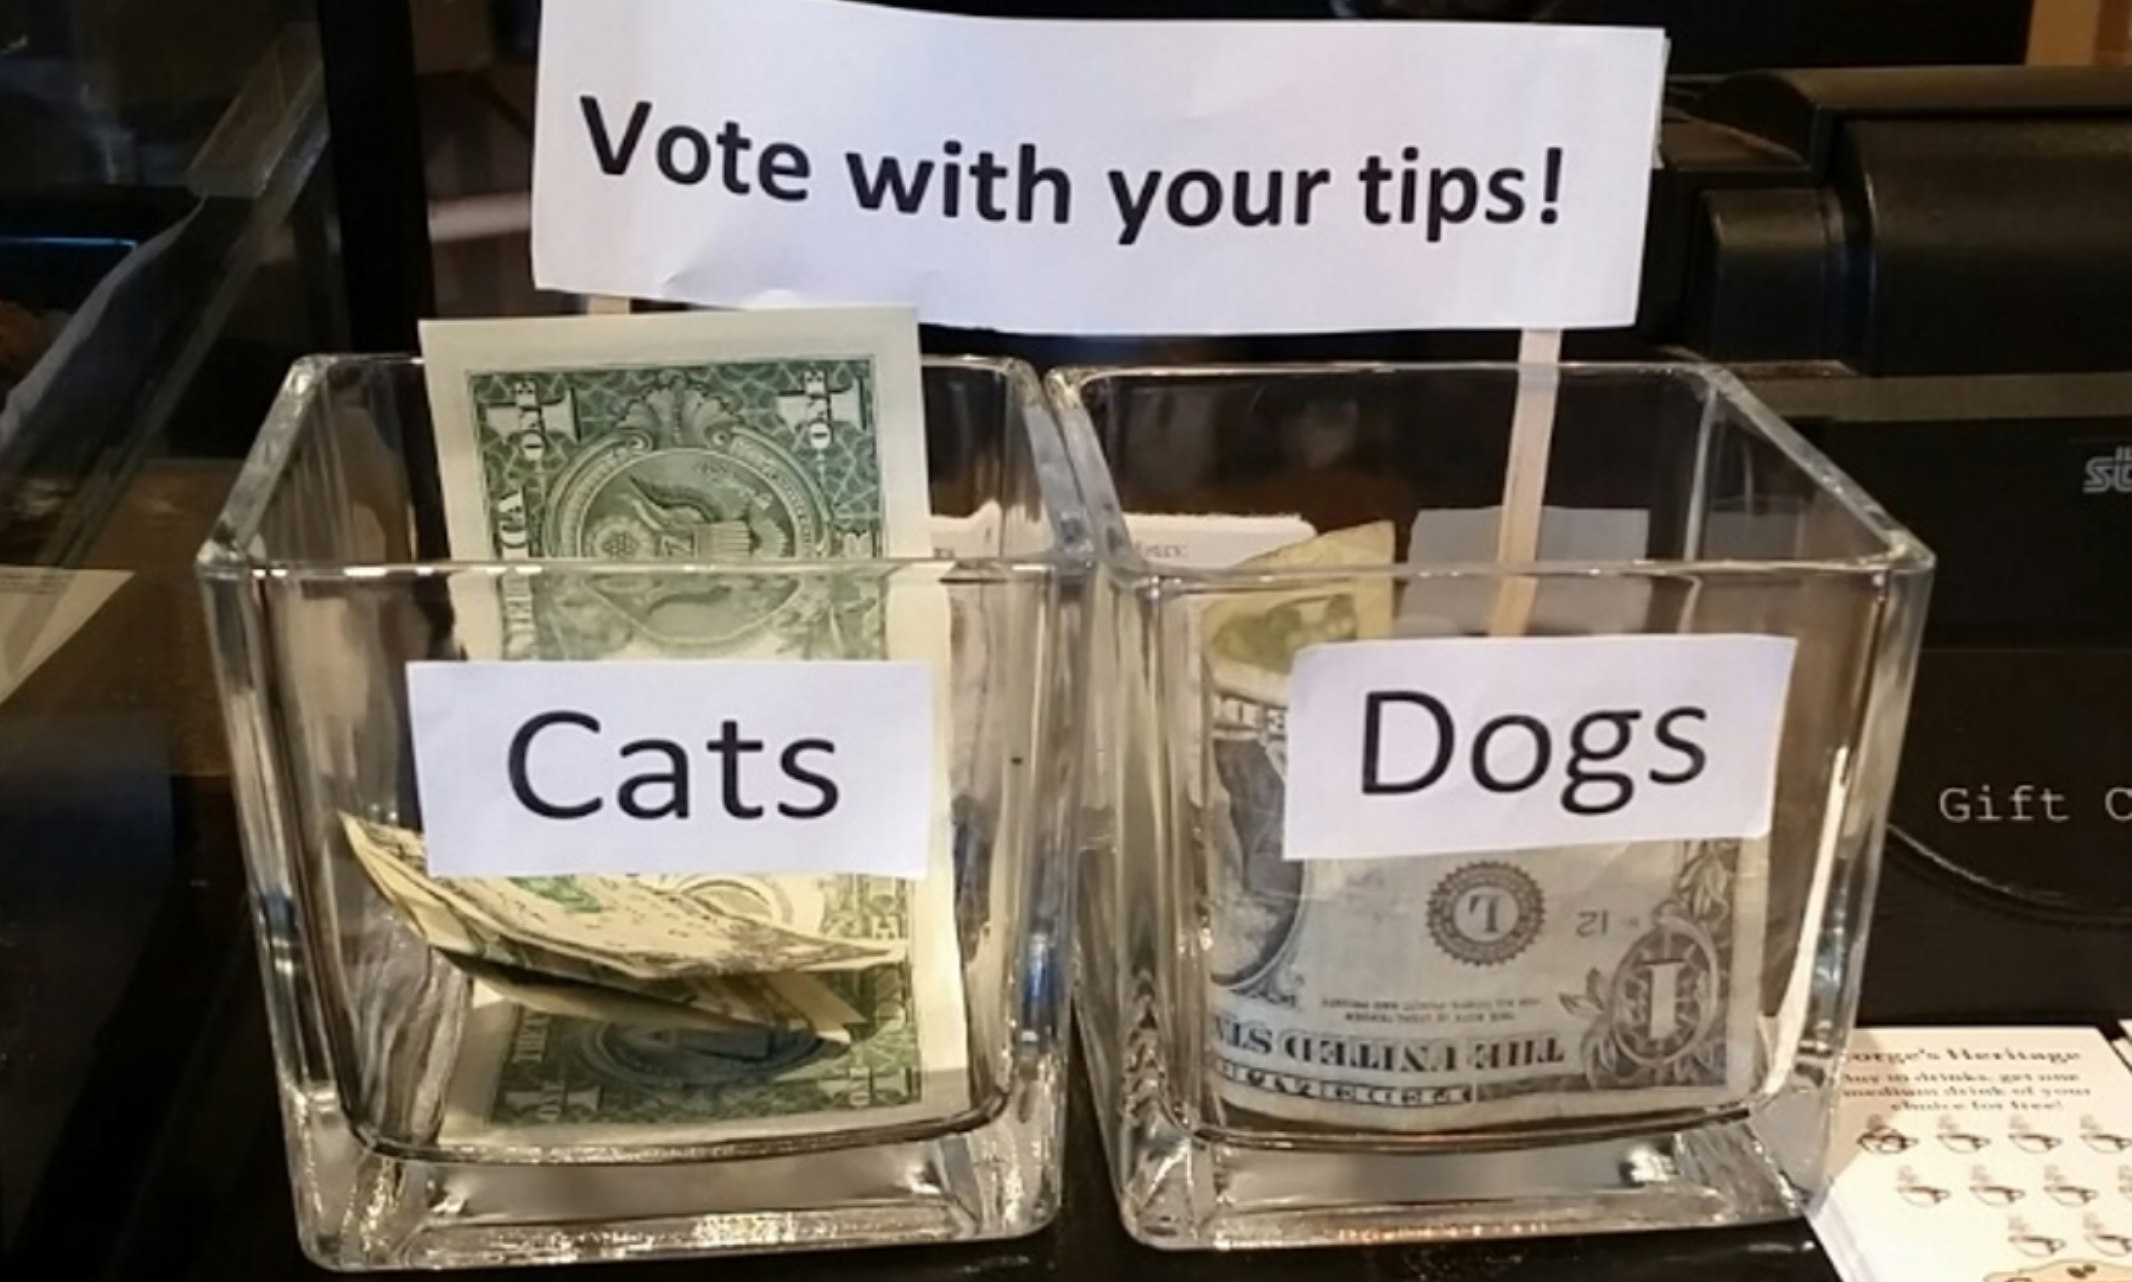 Picture of two tip jars; one says Dogs and the other says Cats